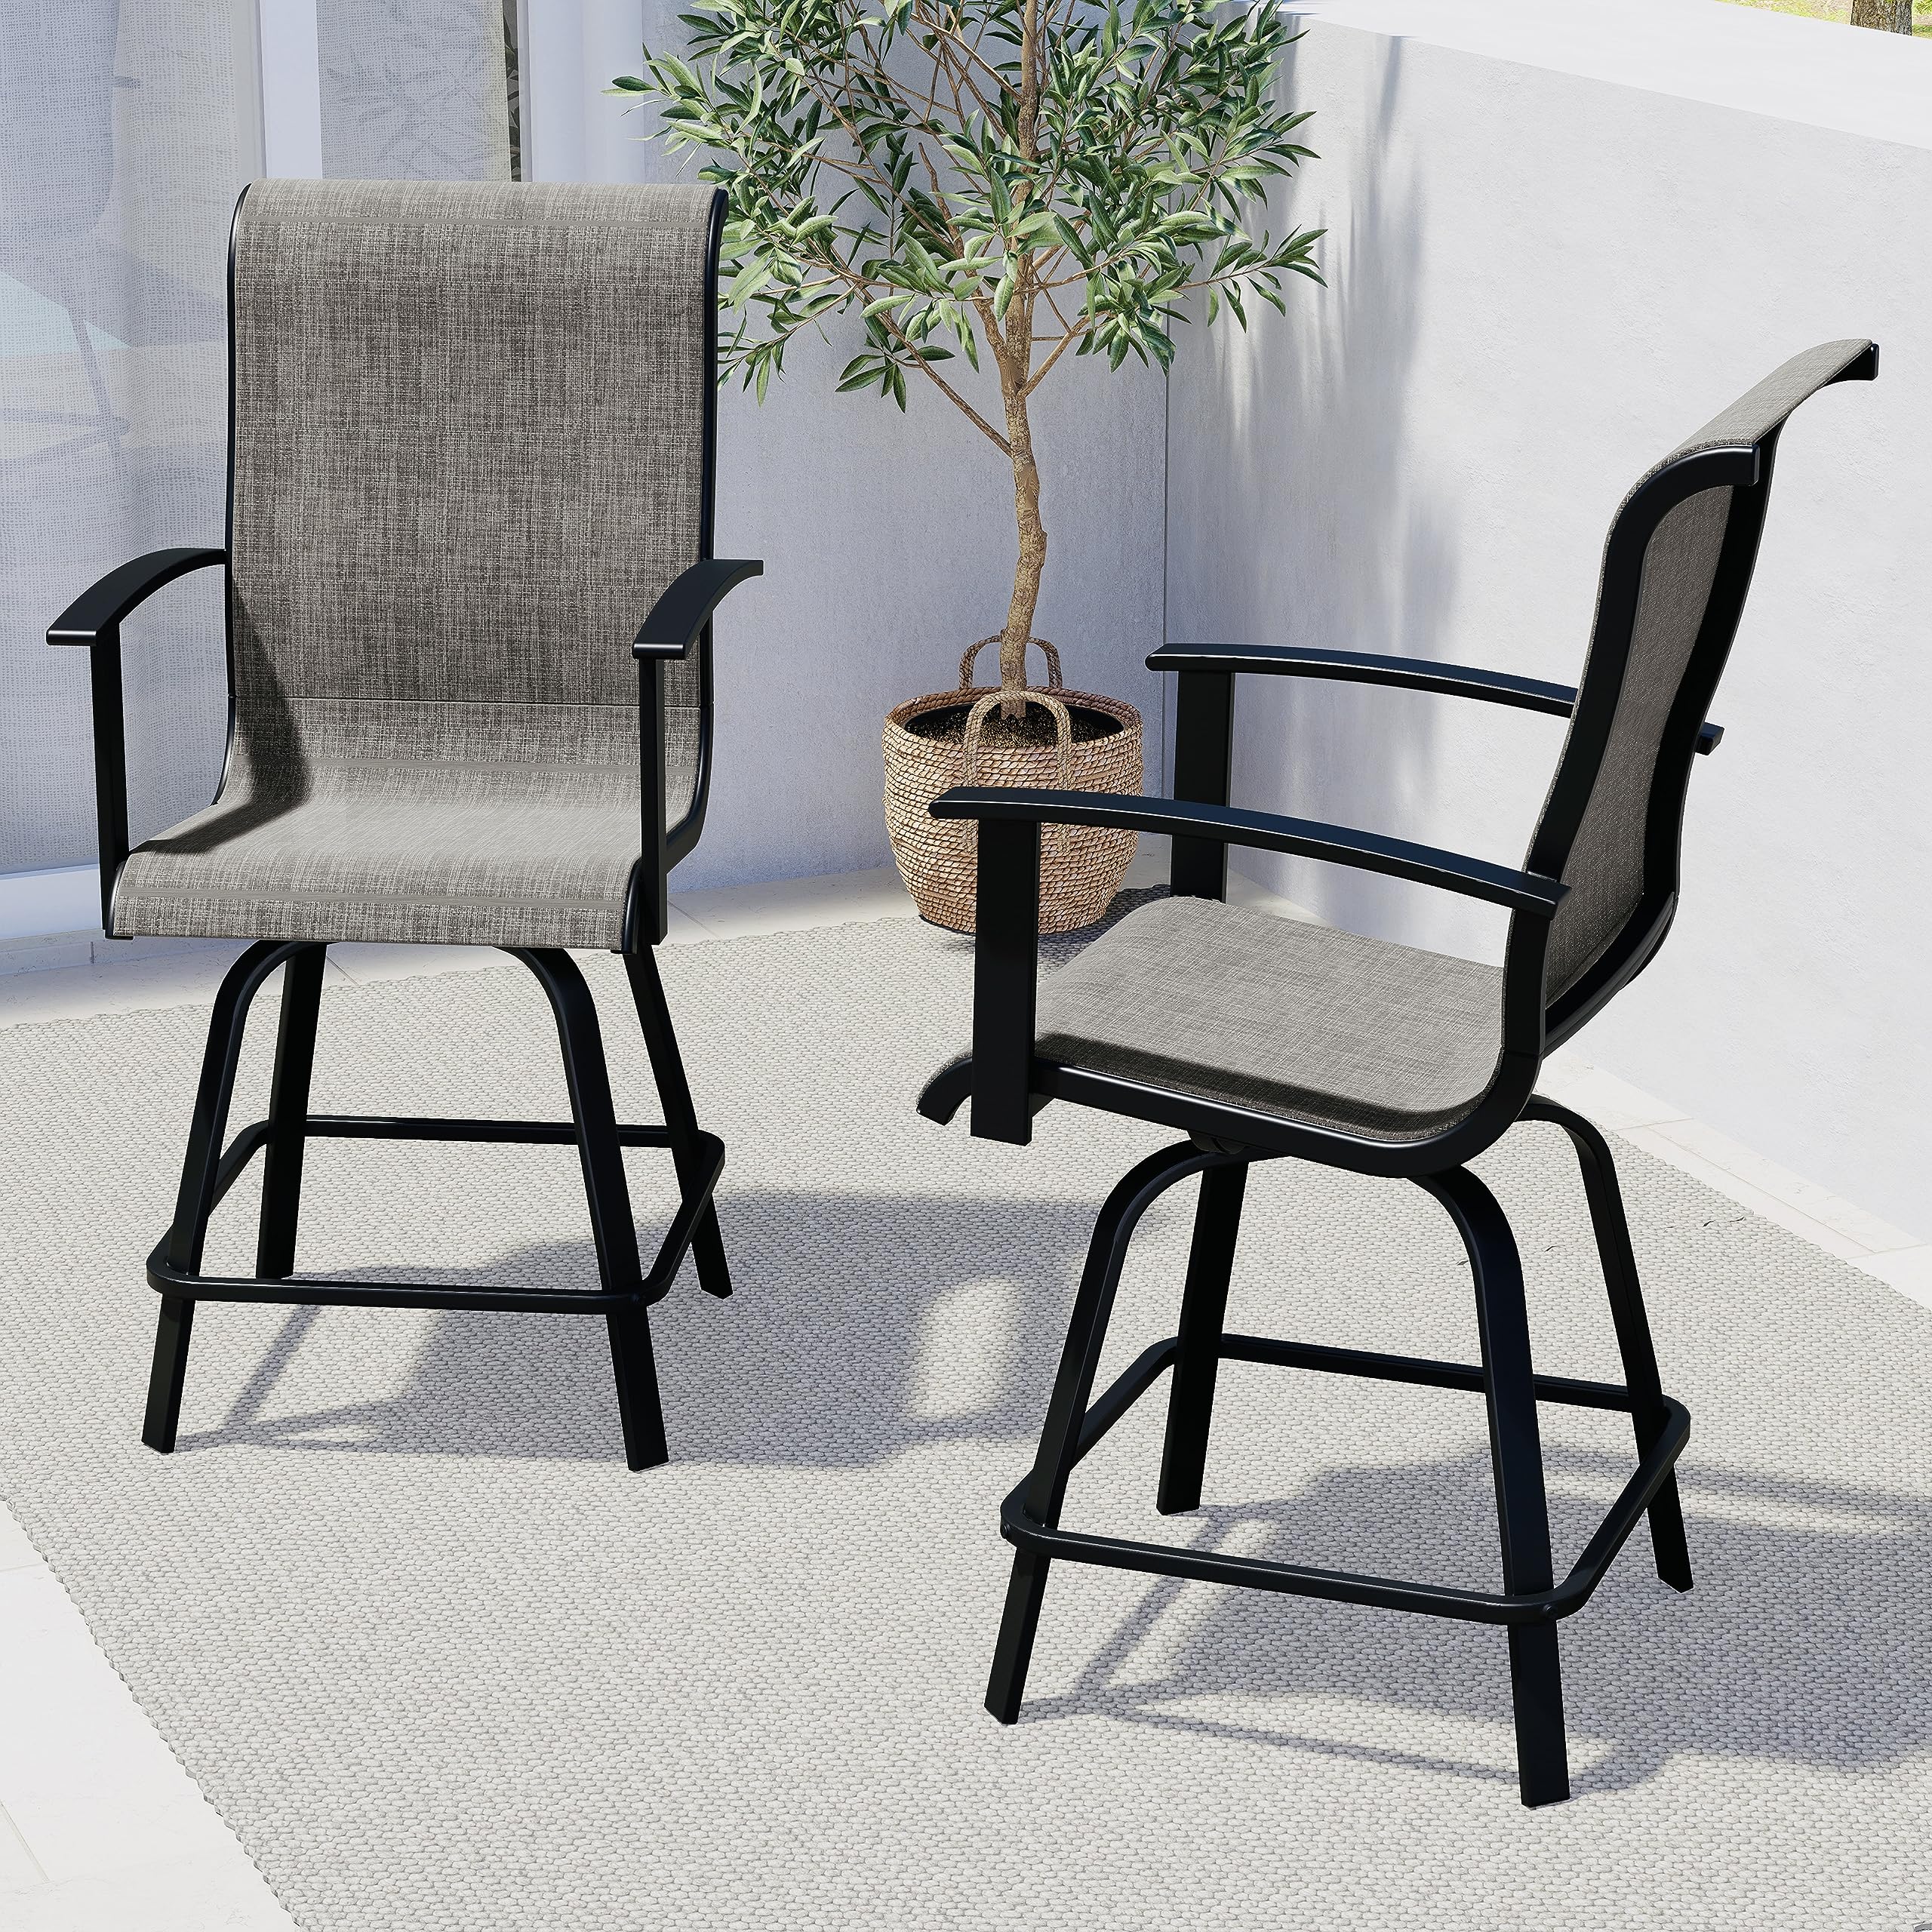 Counter Height Outdoor Swivel Bar Stools, All-Weather Steel Frame Patio Bar Chairs with Arms Backs